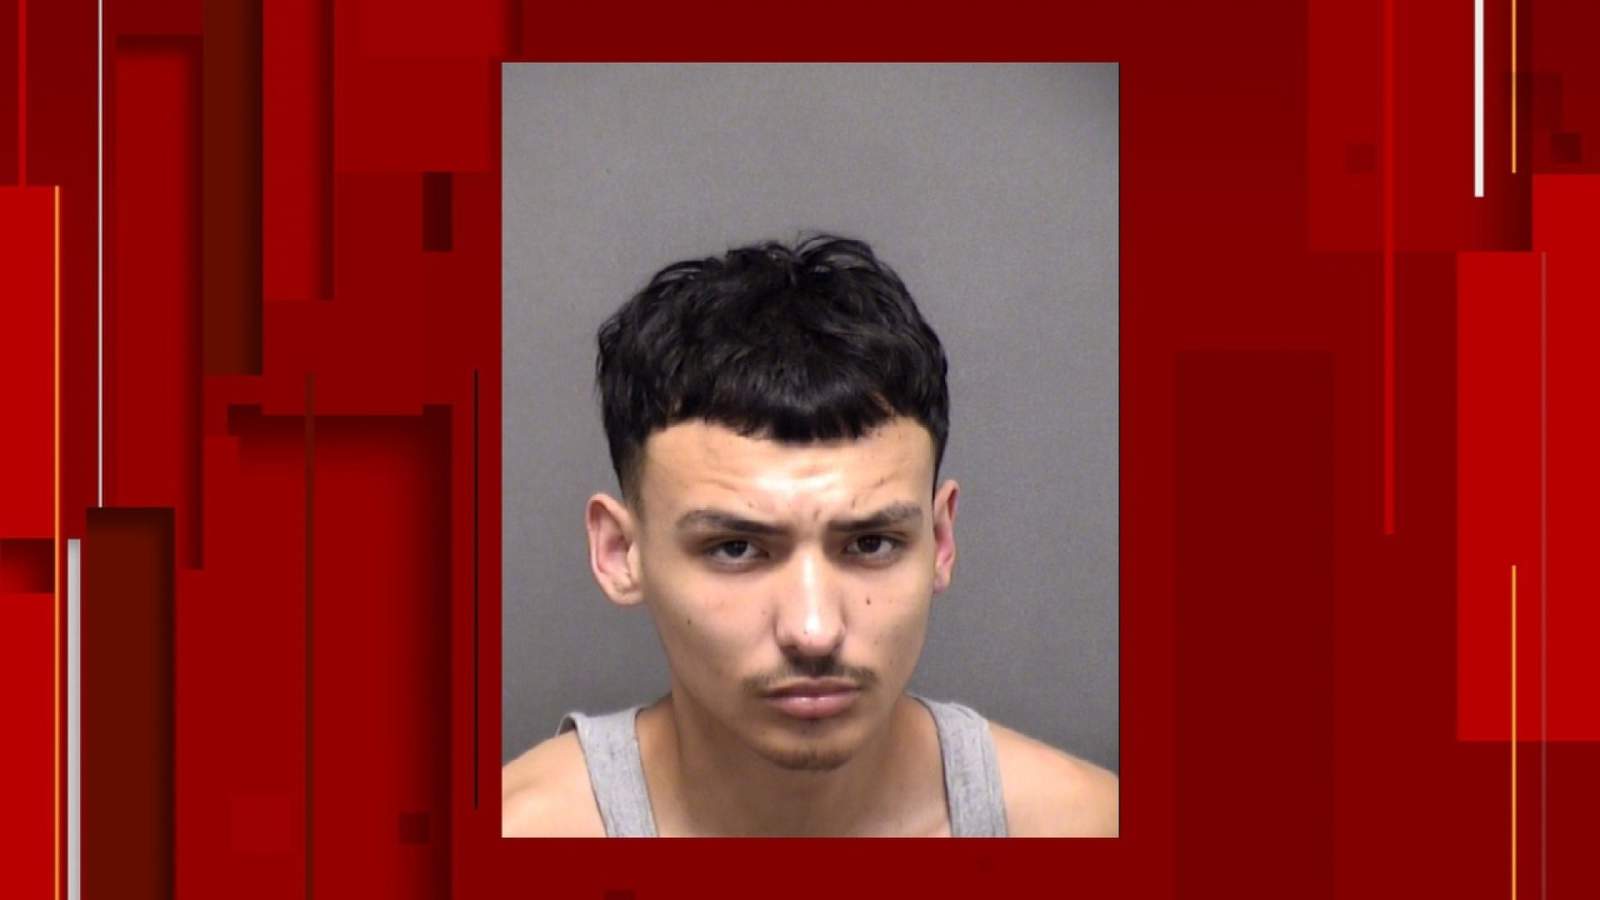 18-year-old charged with intoxication manslaughter after crash